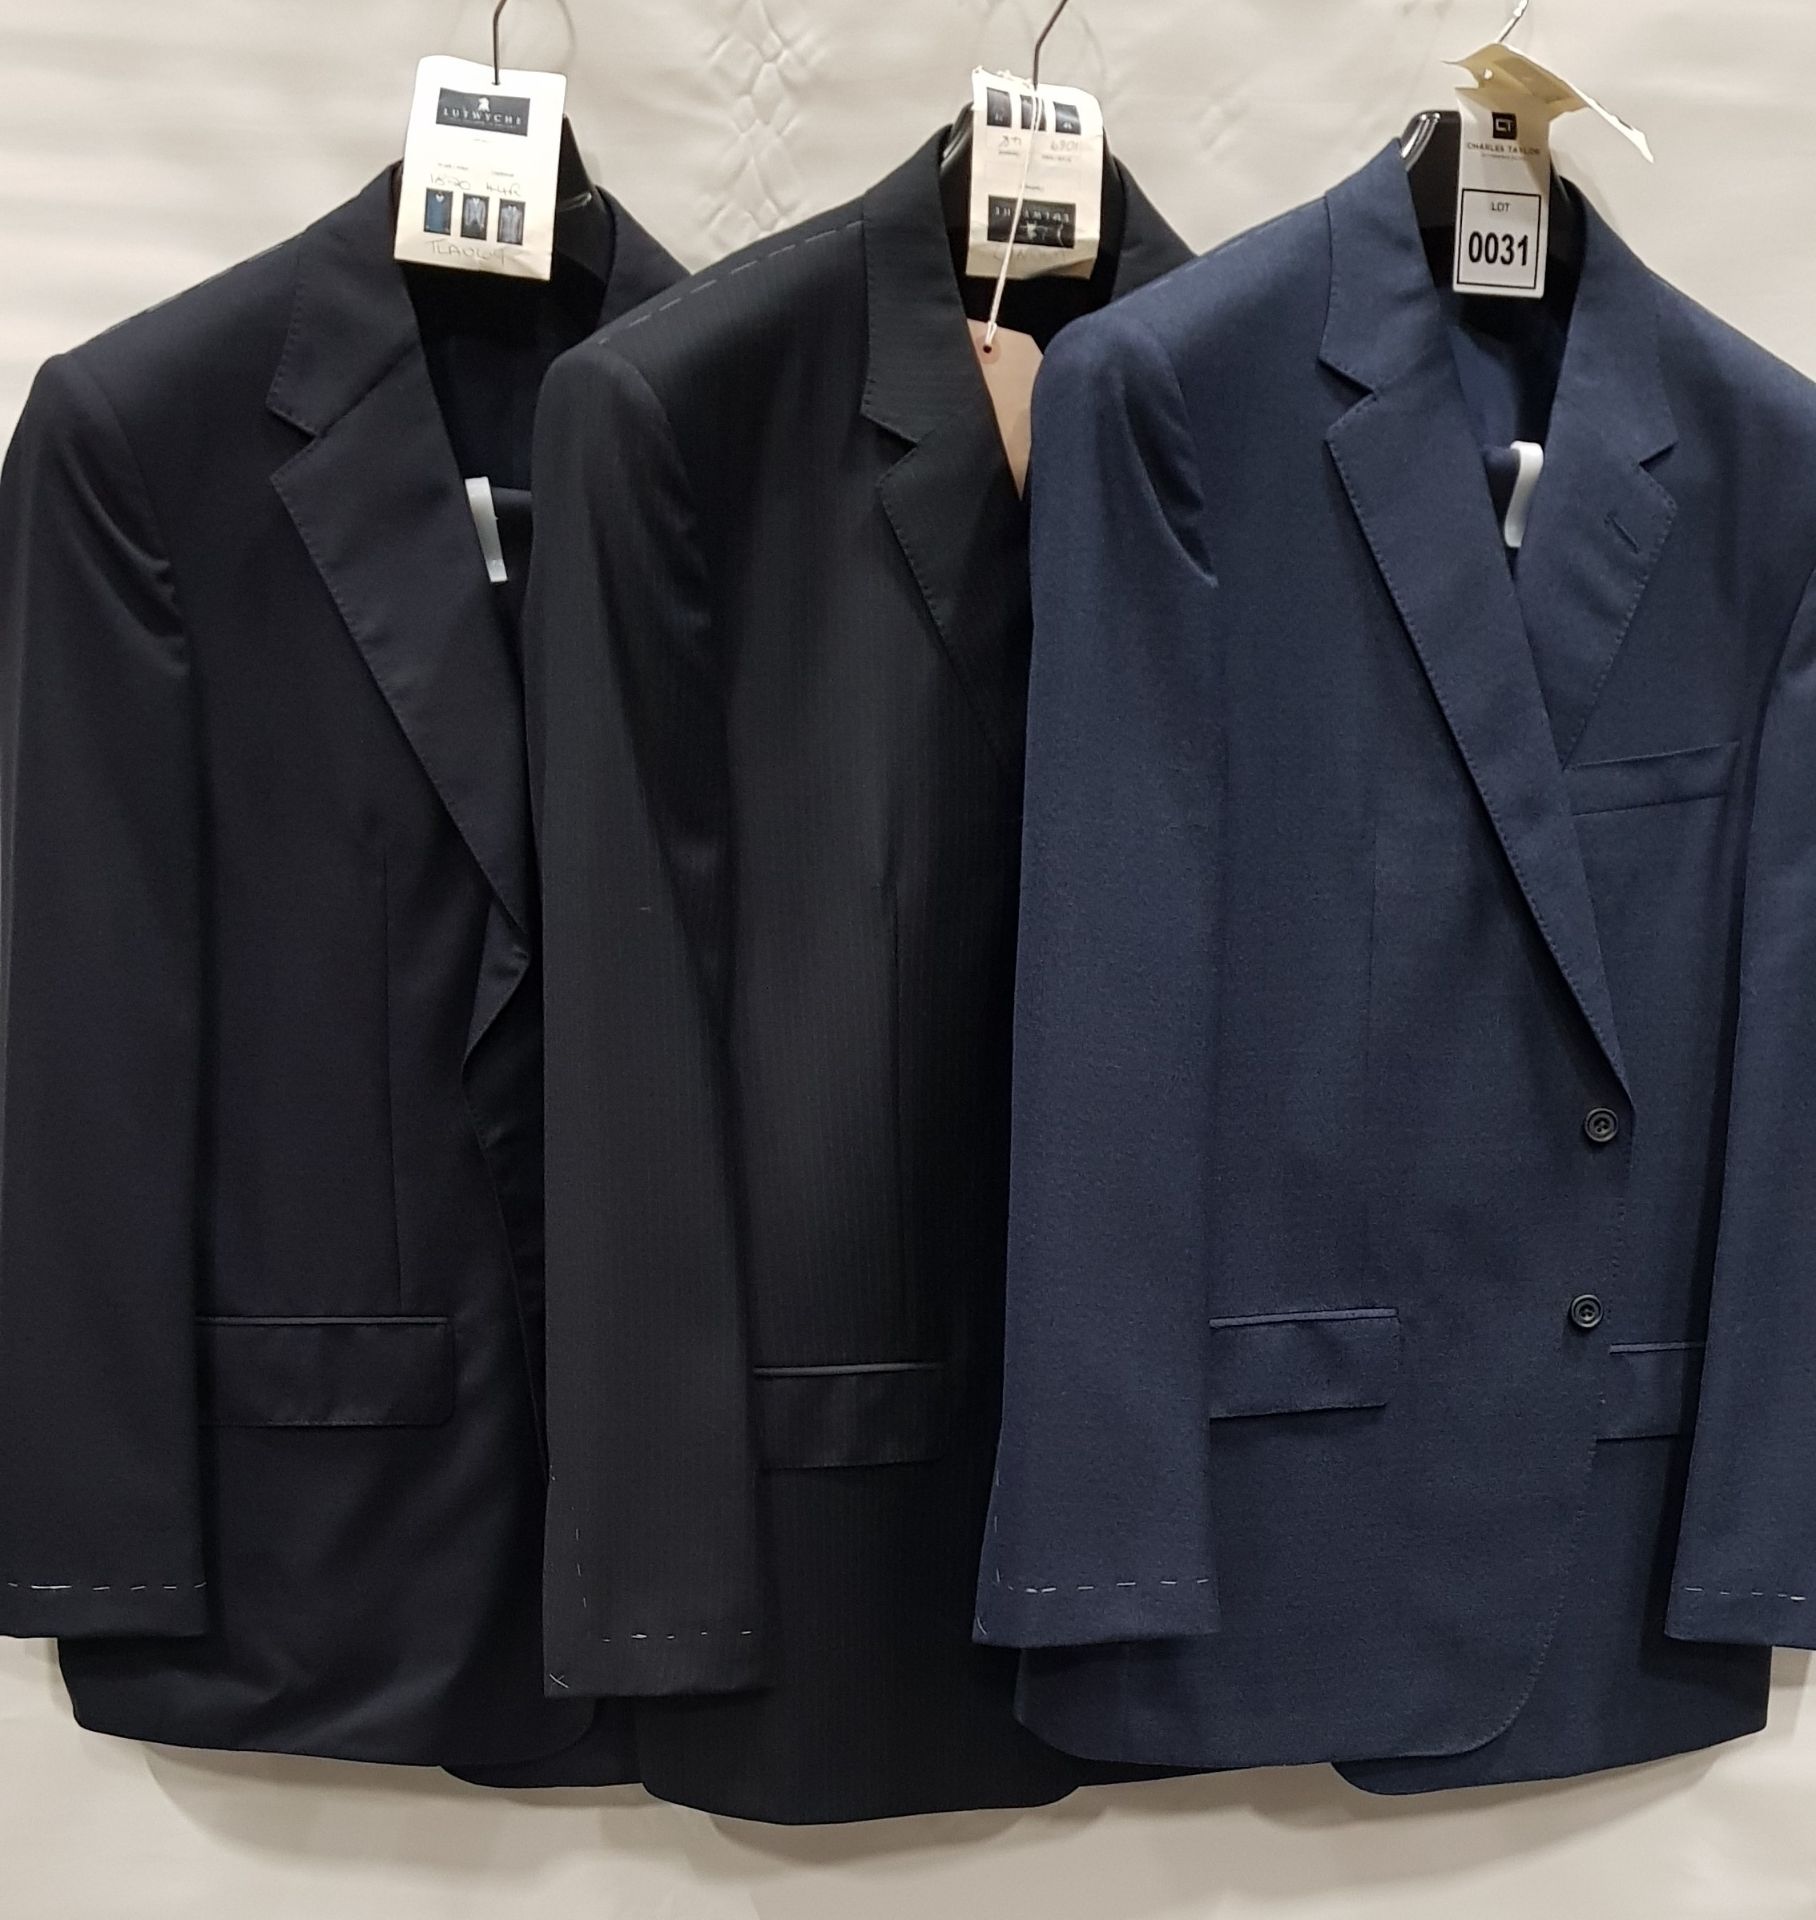 3 X BRAND NEW LUTWYCHE 2 PC DARK BLUE SHADES MATCHING SUITS SIZES 46R, 48, 44R (NOTE NOT FULLY